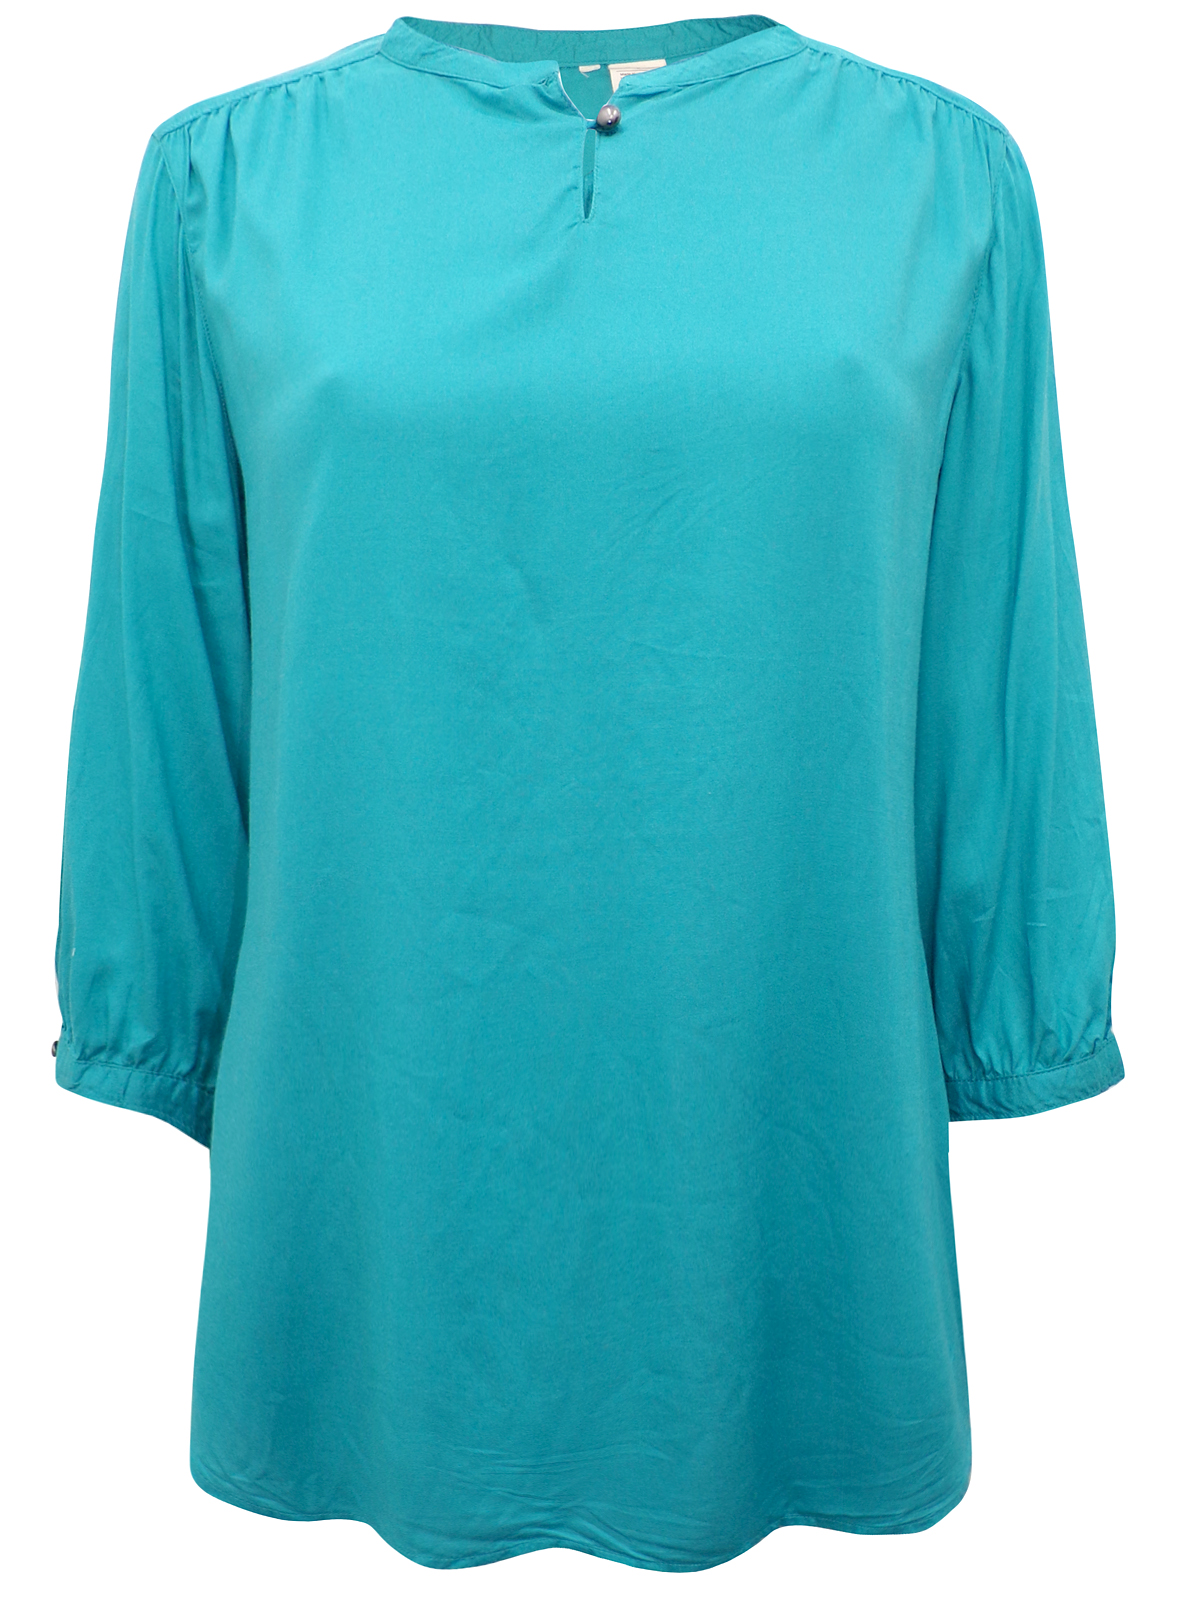 S.Oliver - Triangle - - S.Oliver TURQUOISE Granddad Collar 3/4 Sleeve ...